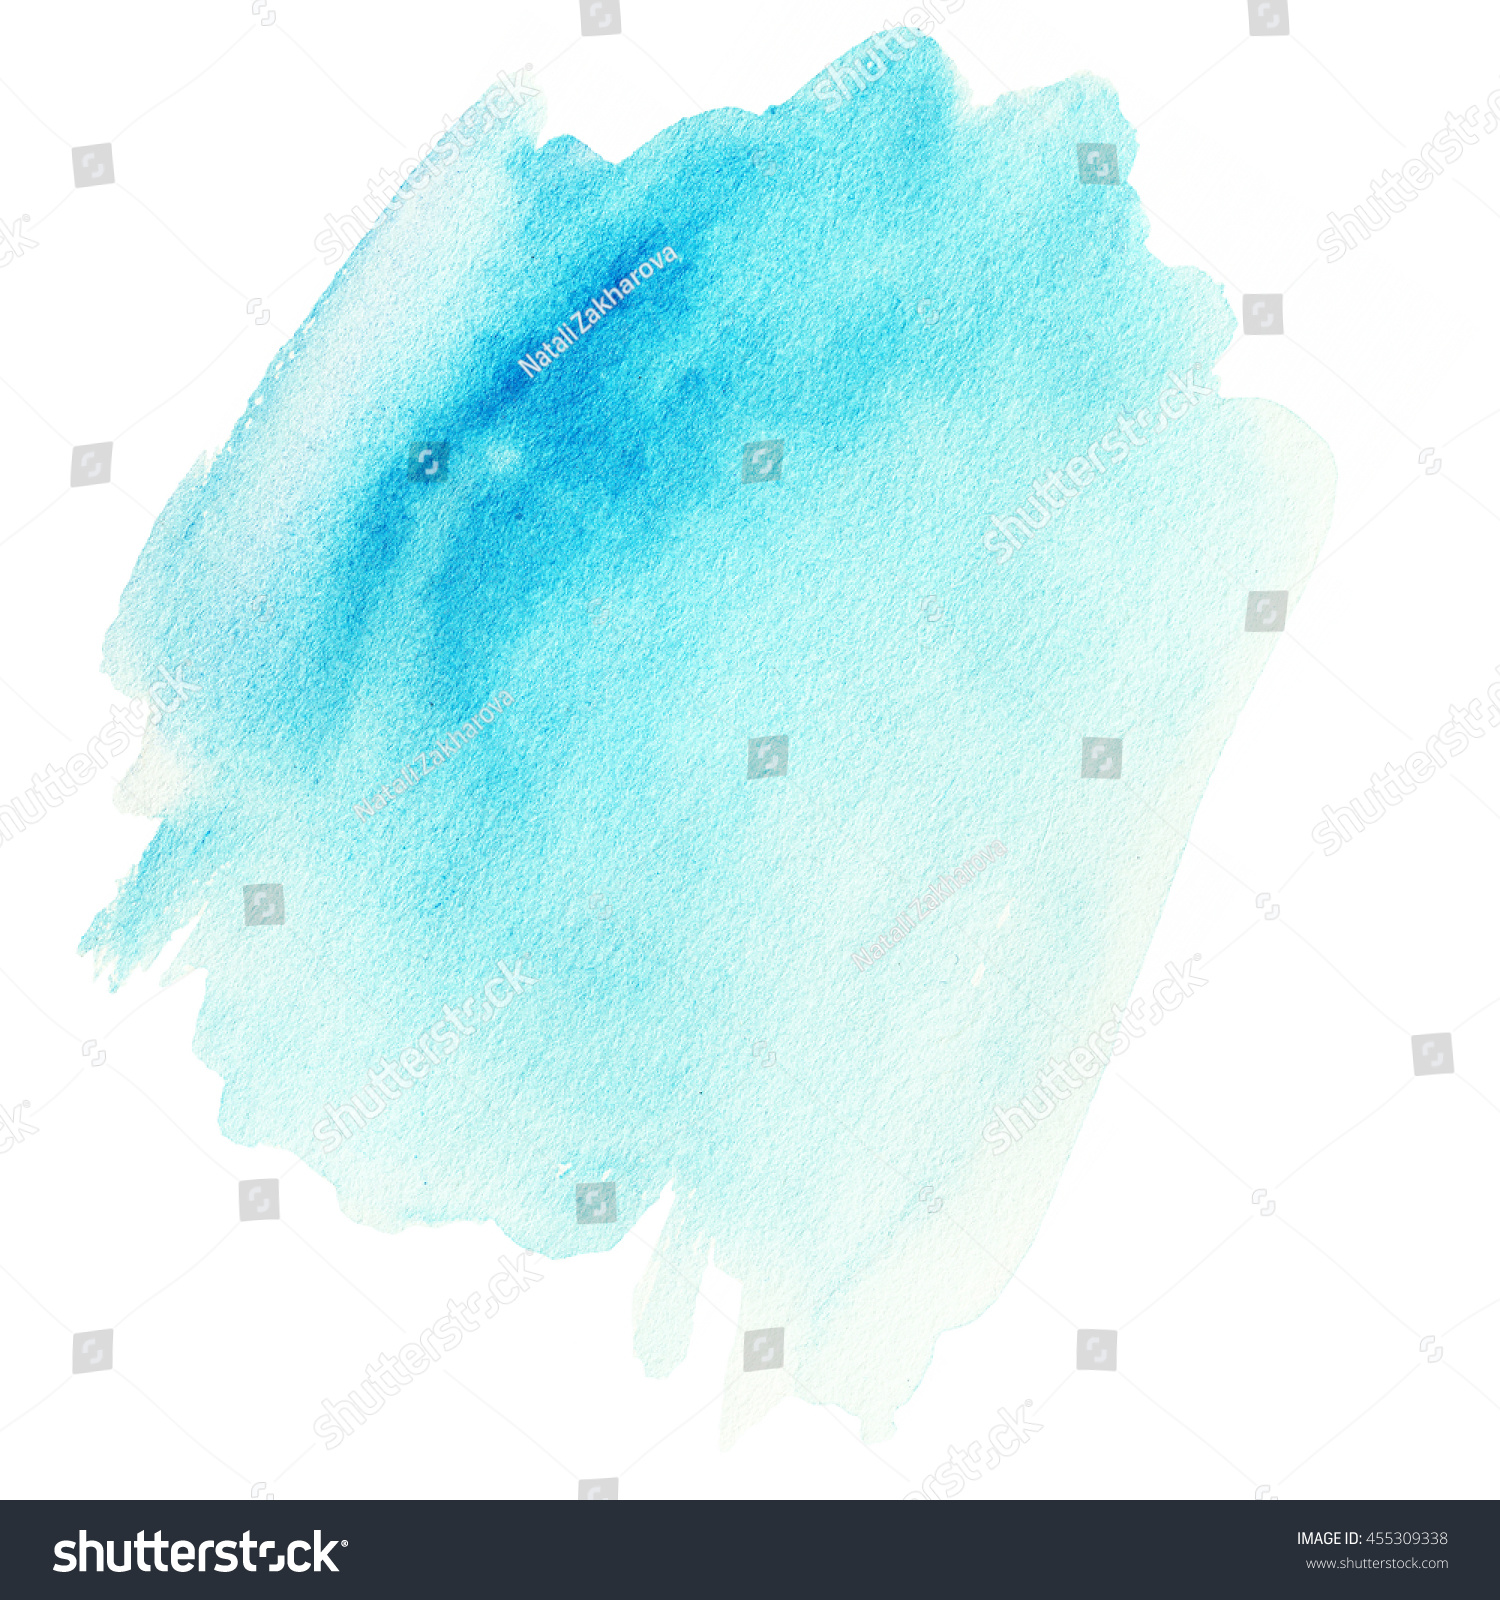 Abstract Watercolor Background Colorful Blue Water Stock ...